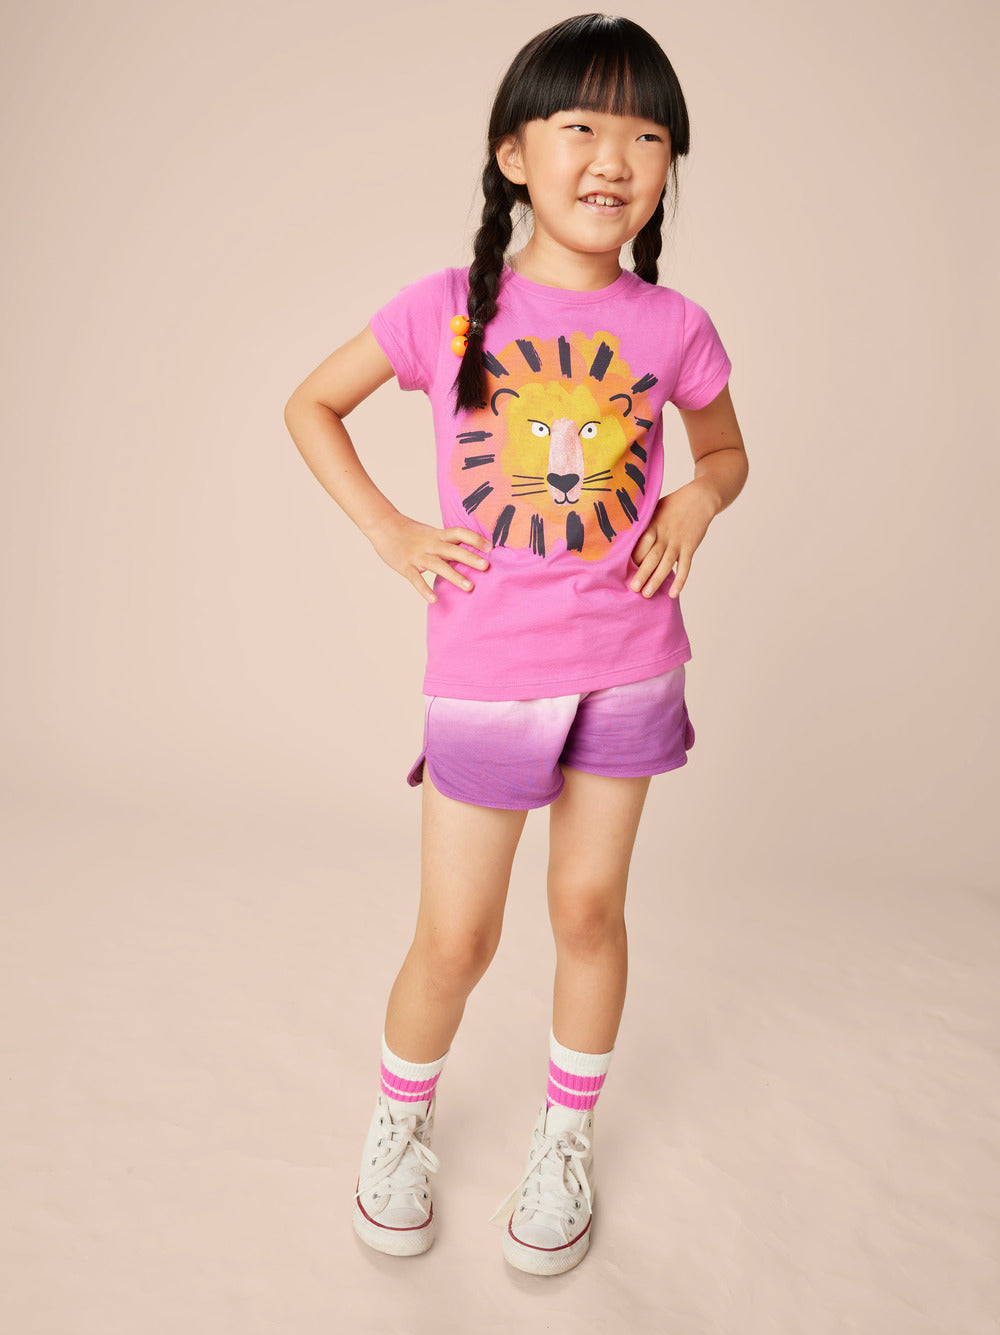 Girls Doubled Sided Lion Tee